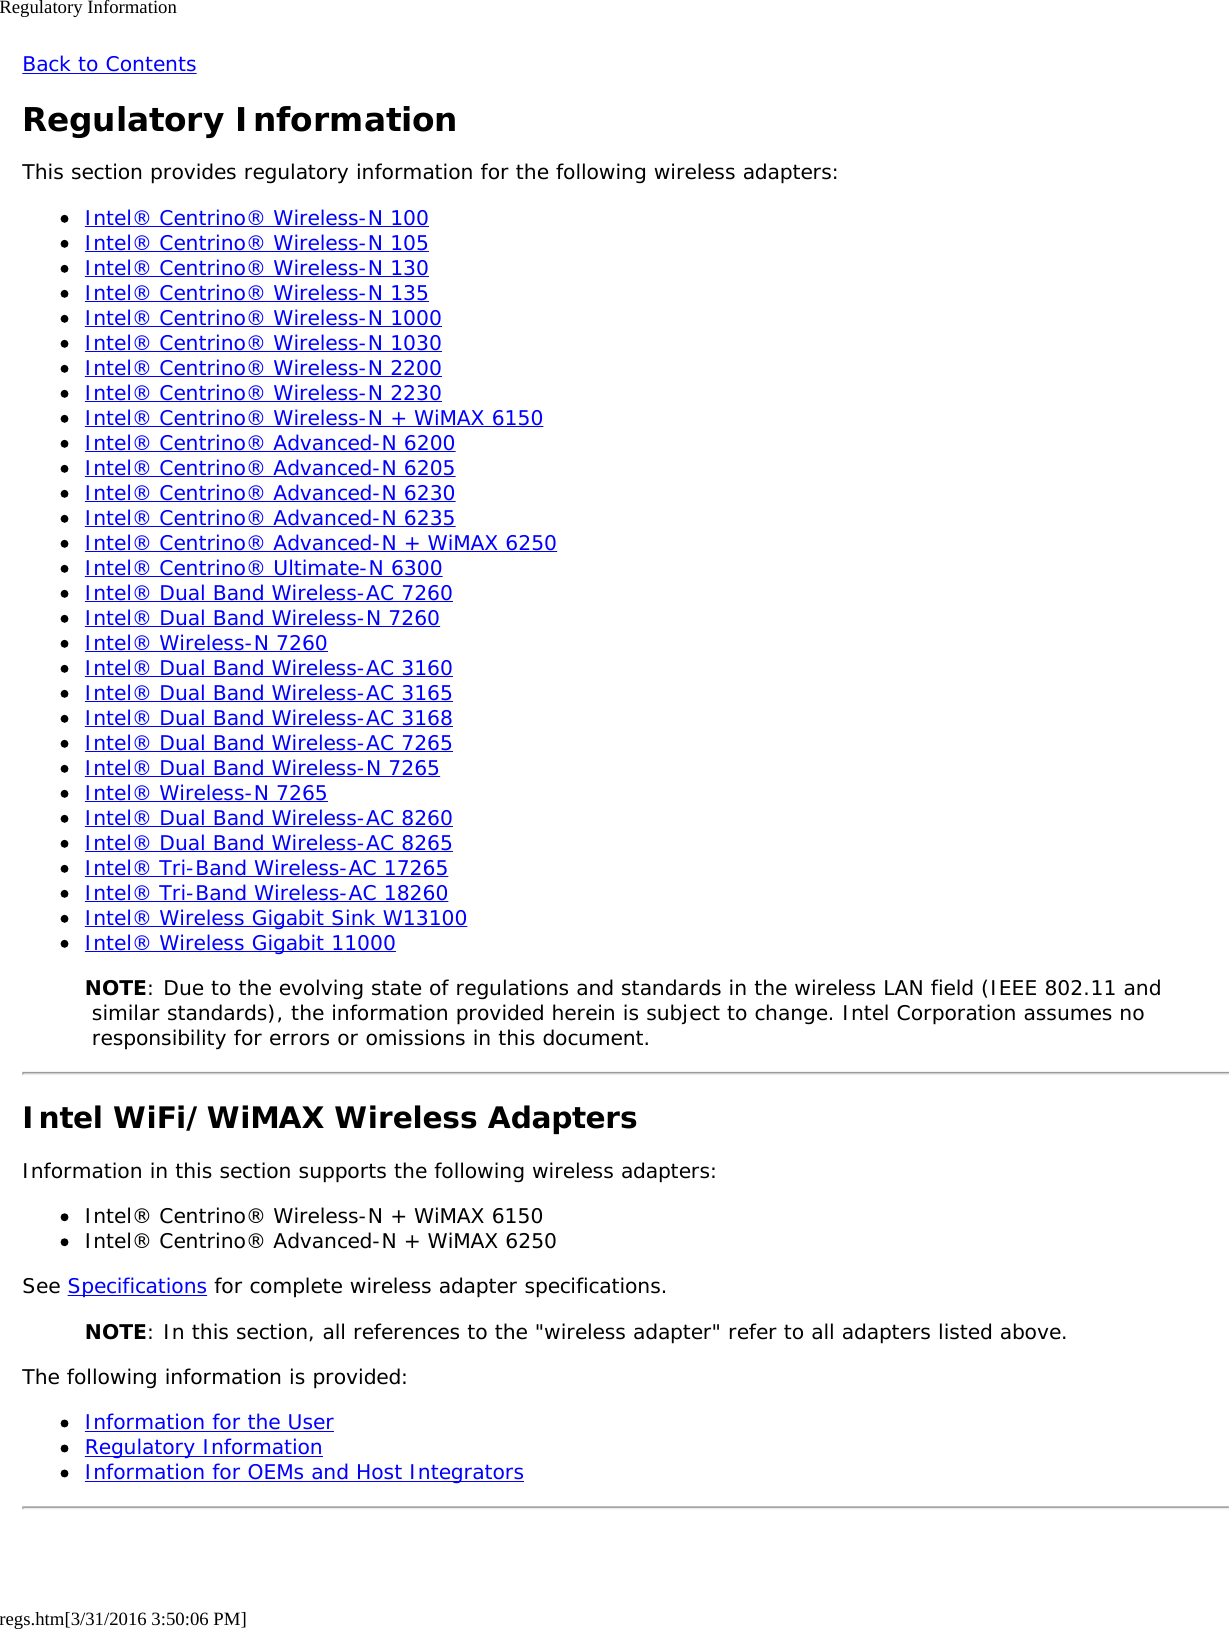 Regulatory Informationregs.htm[3/31/2016 3:50:06 PM]Back to ContentsRegulatory InformationThis section provides regulatory information for the following wireless adapters:Intel® Centrino® Wireless-N 100Intel® Centrino® Wireless-N 105Intel® Centrino® Wireless-N 130Intel® Centrino® Wireless-N 135Intel® Centrino® Wireless-N 1000Intel® Centrino® Wireless-N 1030Intel® Centrino® Wireless-N 2200Intel® Centrino® Wireless-N 2230Intel® Centrino® Wireless-N + WiMAX 6150Intel® Centrino® Advanced-N 6200Intel® Centrino® Advanced-N 6205Intel® Centrino® Advanced-N 6230Intel® Centrino® Advanced-N 6235Intel® Centrino® Advanced-N + WiMAX 6250Intel® Centrino® Ultimate-N 6300Intel® Dual Band Wireless-AC 7260Intel® Dual Band Wireless-N 7260Intel® Wireless-N 7260Intel® Dual Band Wireless-AC 3160Intel® Dual Band Wireless-AC 3165Intel® Dual Band Wireless-AC 3168Intel® Dual Band Wireless-AC 7265Intel® Dual Band Wireless-N 7265Intel® Wireless-N 7265Intel® Dual Band Wireless-AC 8260Intel® Dual Band Wireless-AC 8265Intel® Tri-Band Wireless-AC 17265Intel® Tri-Band Wireless-AC 18260Intel® Wireless Gigabit Sink W13100Intel® Wireless Gigabit 11000NOTE: Due to the evolving state of regulations and standards in the wireless LAN field (IEEE 802.11 and similar standards), the information provided herein is subject to change. Intel Corporation assumes no responsibility for errors or omissions in this document.Intel WiFi/WiMAX Wireless AdaptersInformation in this section supports the following wireless adapters:Intel® Centrino® Wireless-N + WiMAX 6150Intel® Centrino® Advanced-N + WiMAX 6250See Specifications for complete wireless adapter specifications.NOTE: In this section, all references to the &quot;wireless adapter&quot; refer to all adapters listed above.The following information is provided:Information for the UserRegulatory InformationInformation for OEMs and Host Integrators